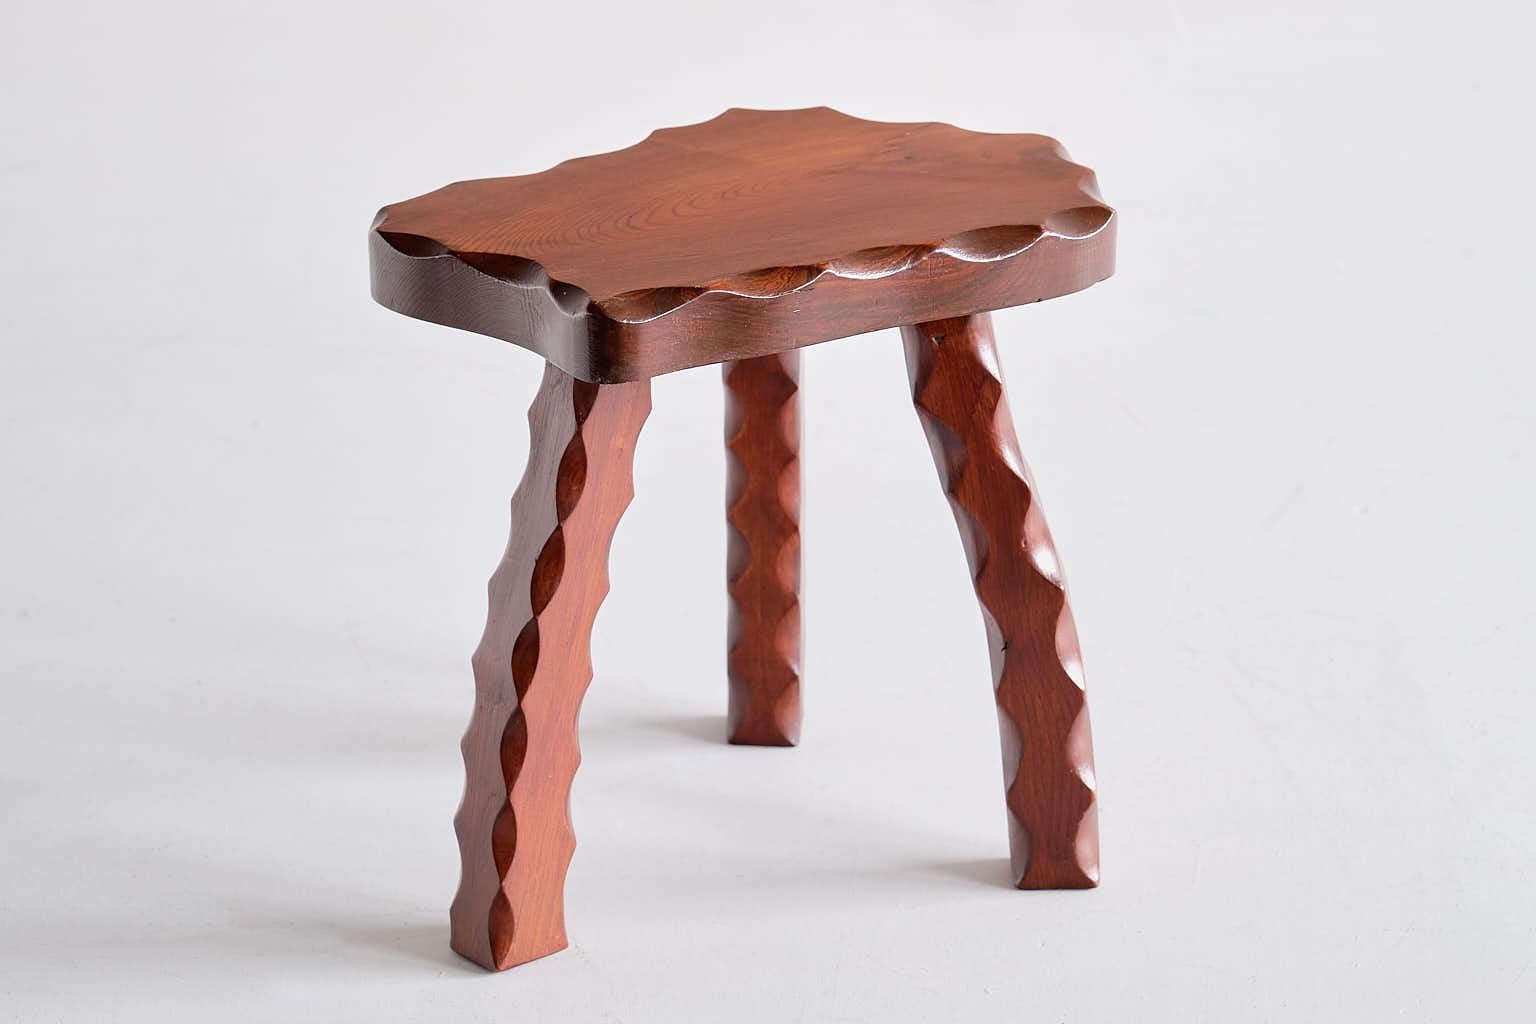 This sculptural stool was produced in France in the late 1950s. The striking design consists of an organic shaped top with a carved edge in a serrated pattern and three legs with a similar carved pattern on all sides. All parts are made of solid elm